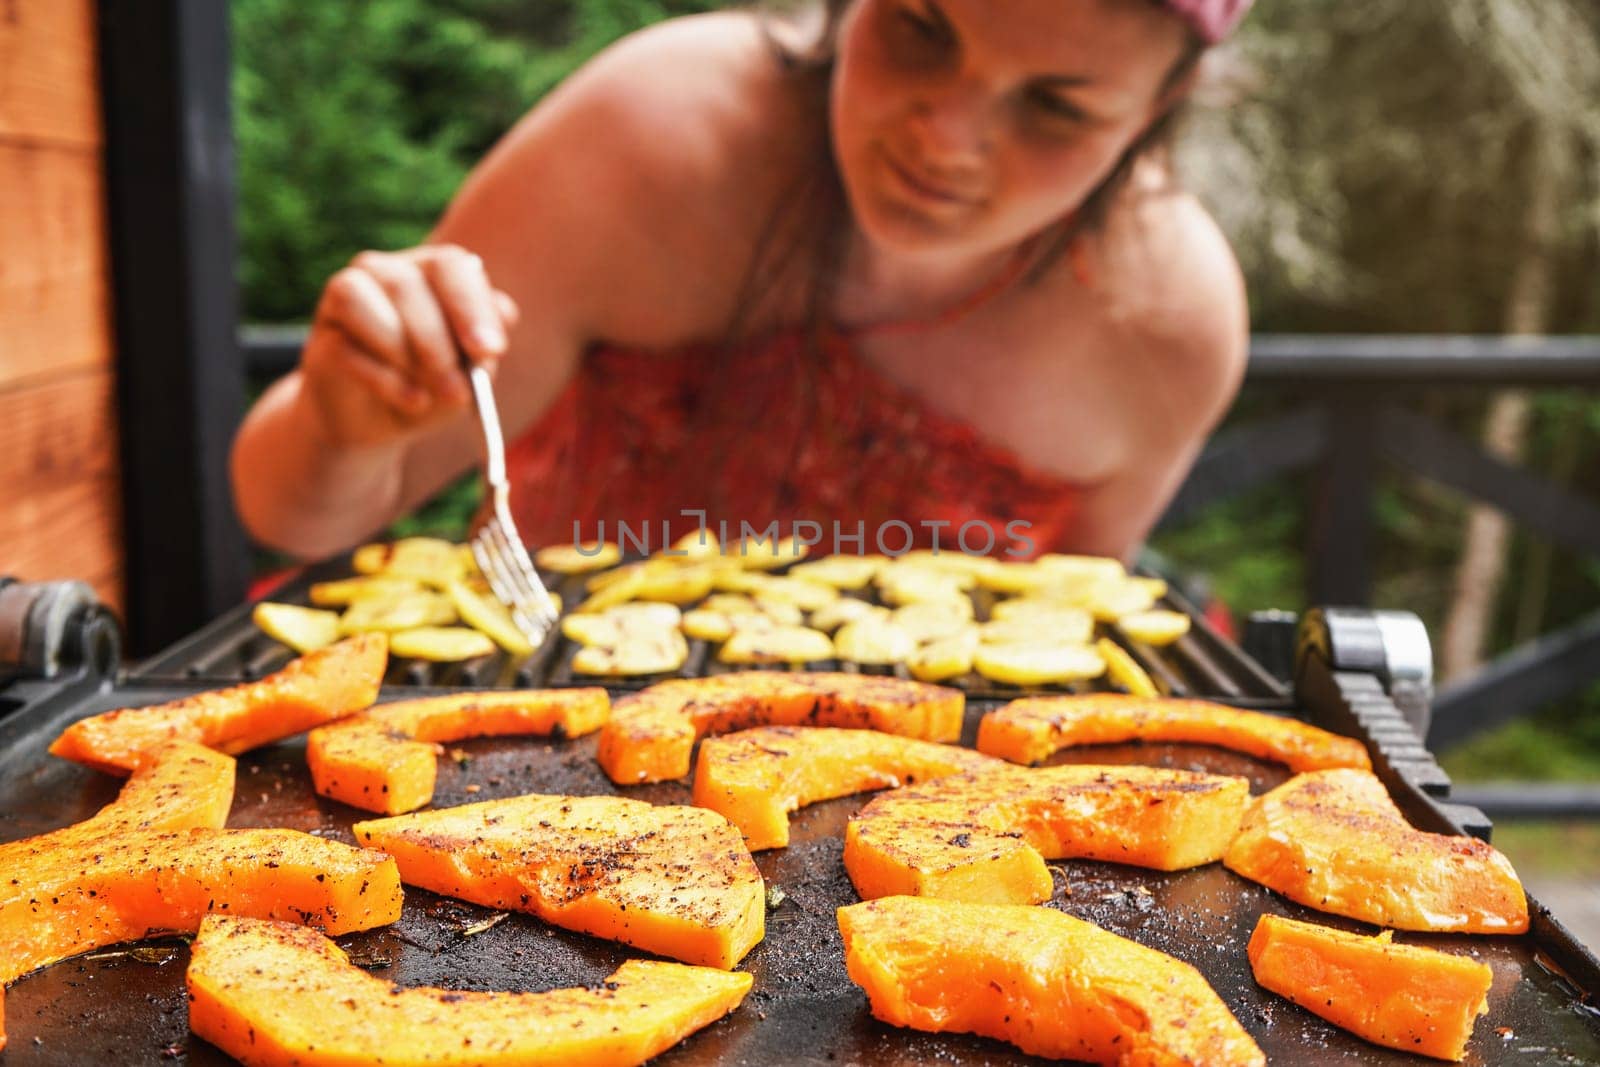 Butternut squash pieces grilled on electric grill, focus on bright orange vegetables seasoned with spice, blurred young woman in background by Ivanko